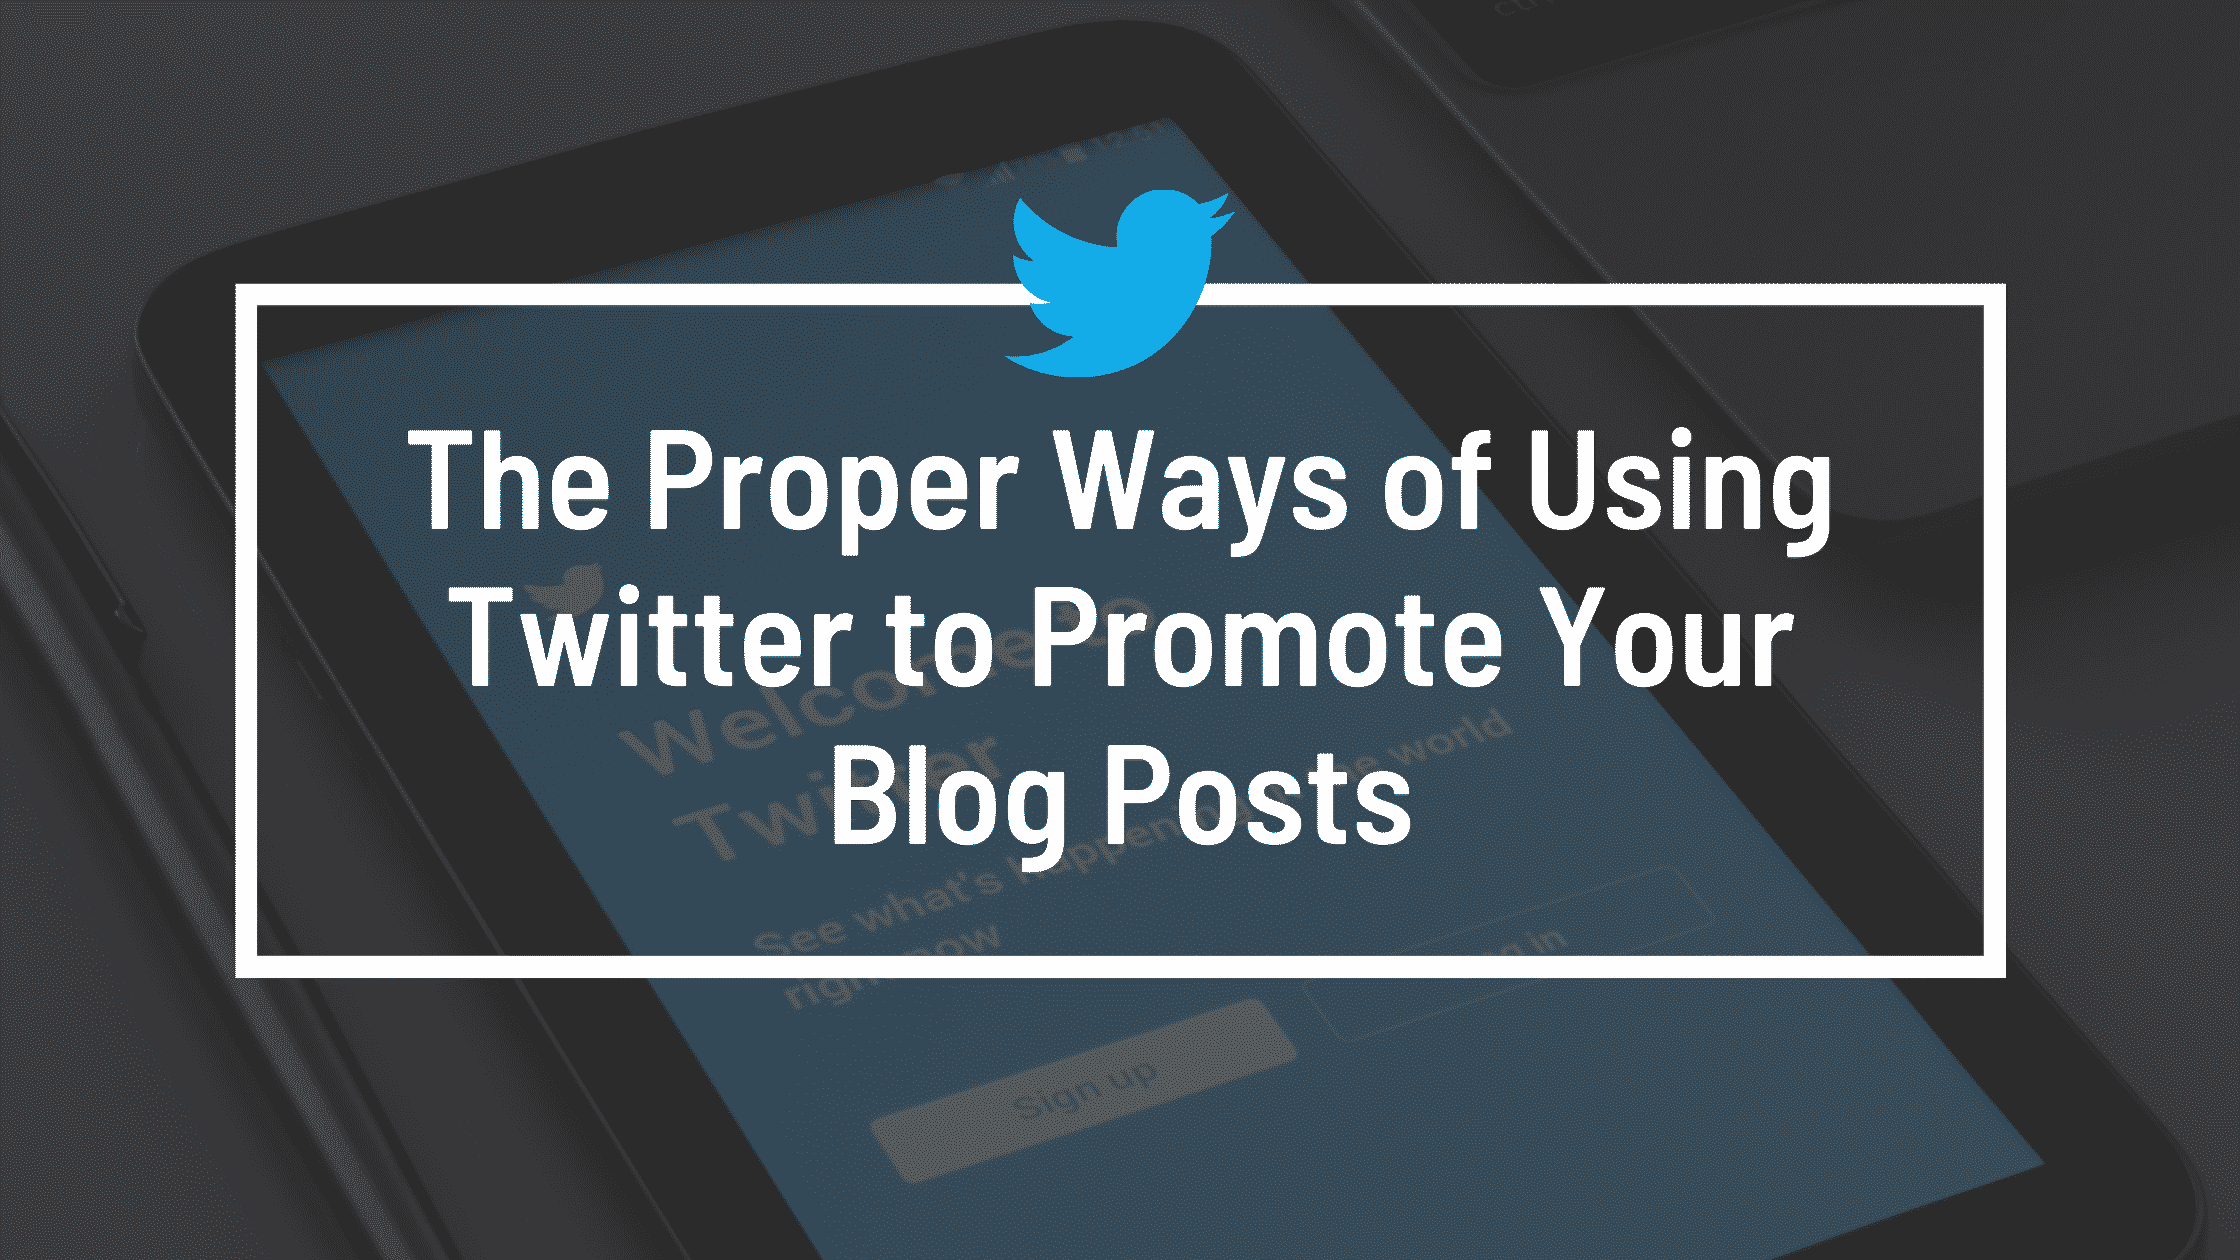 The Proper Ways of Using Twitter to Promote Your Blog Posts